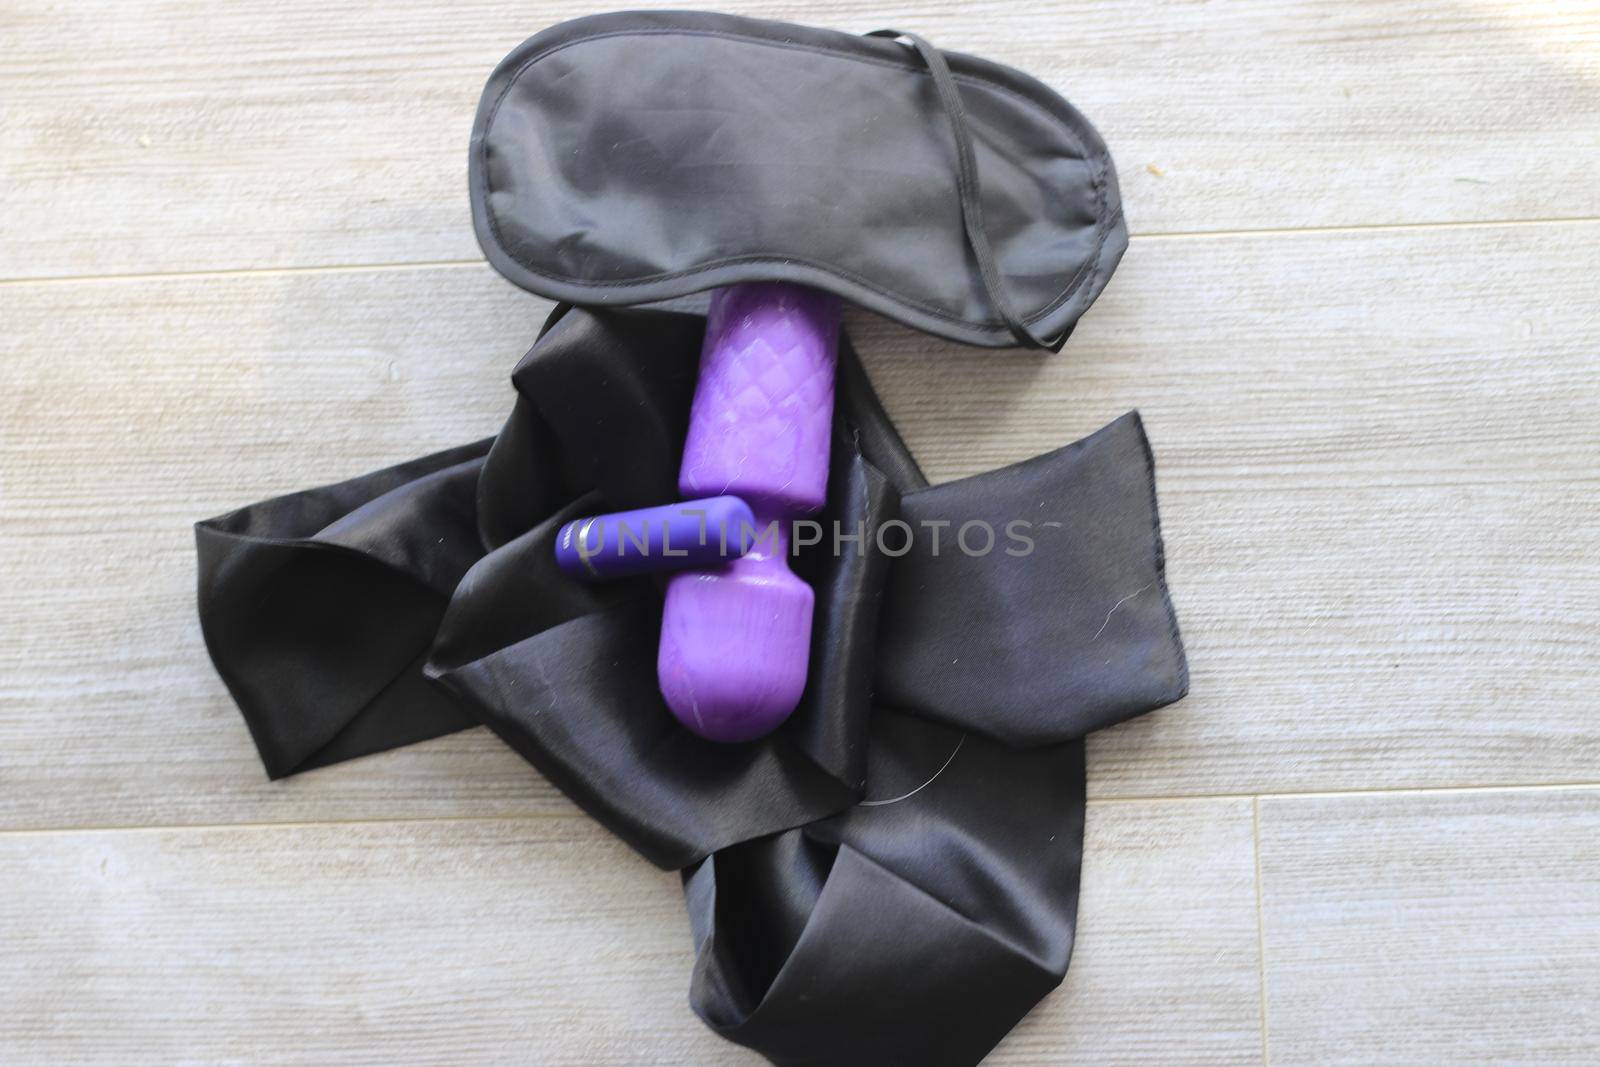 BDSM themed images, theme of sexual wellness and consent. High quality photo